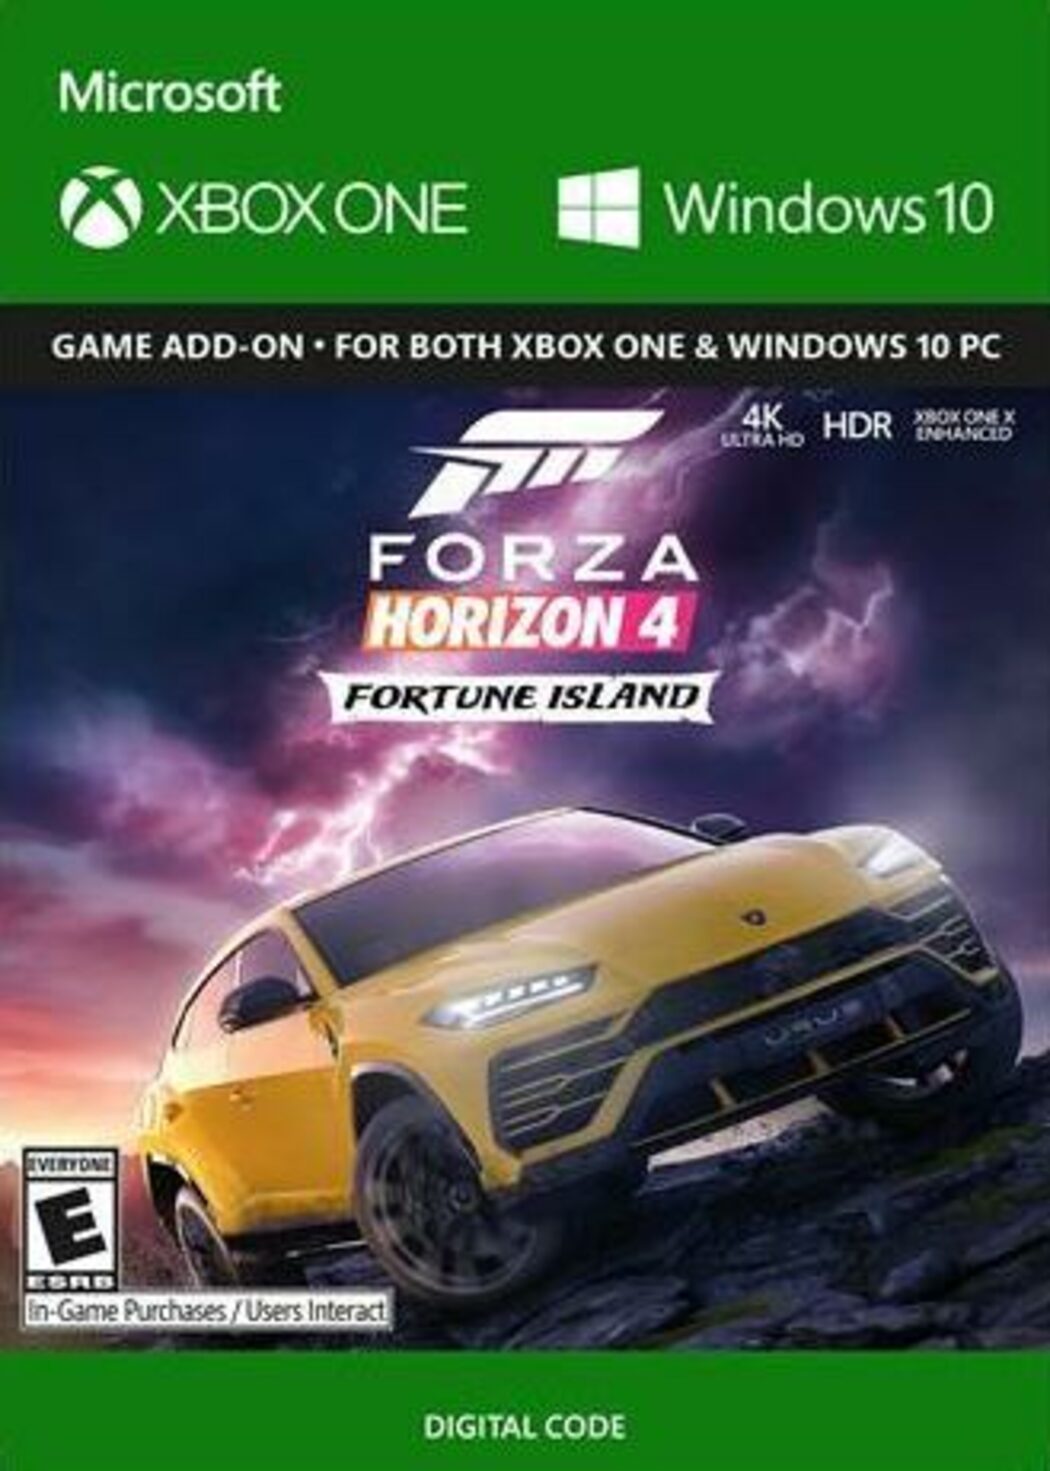 download forza horizon 4 ultimate edition for free